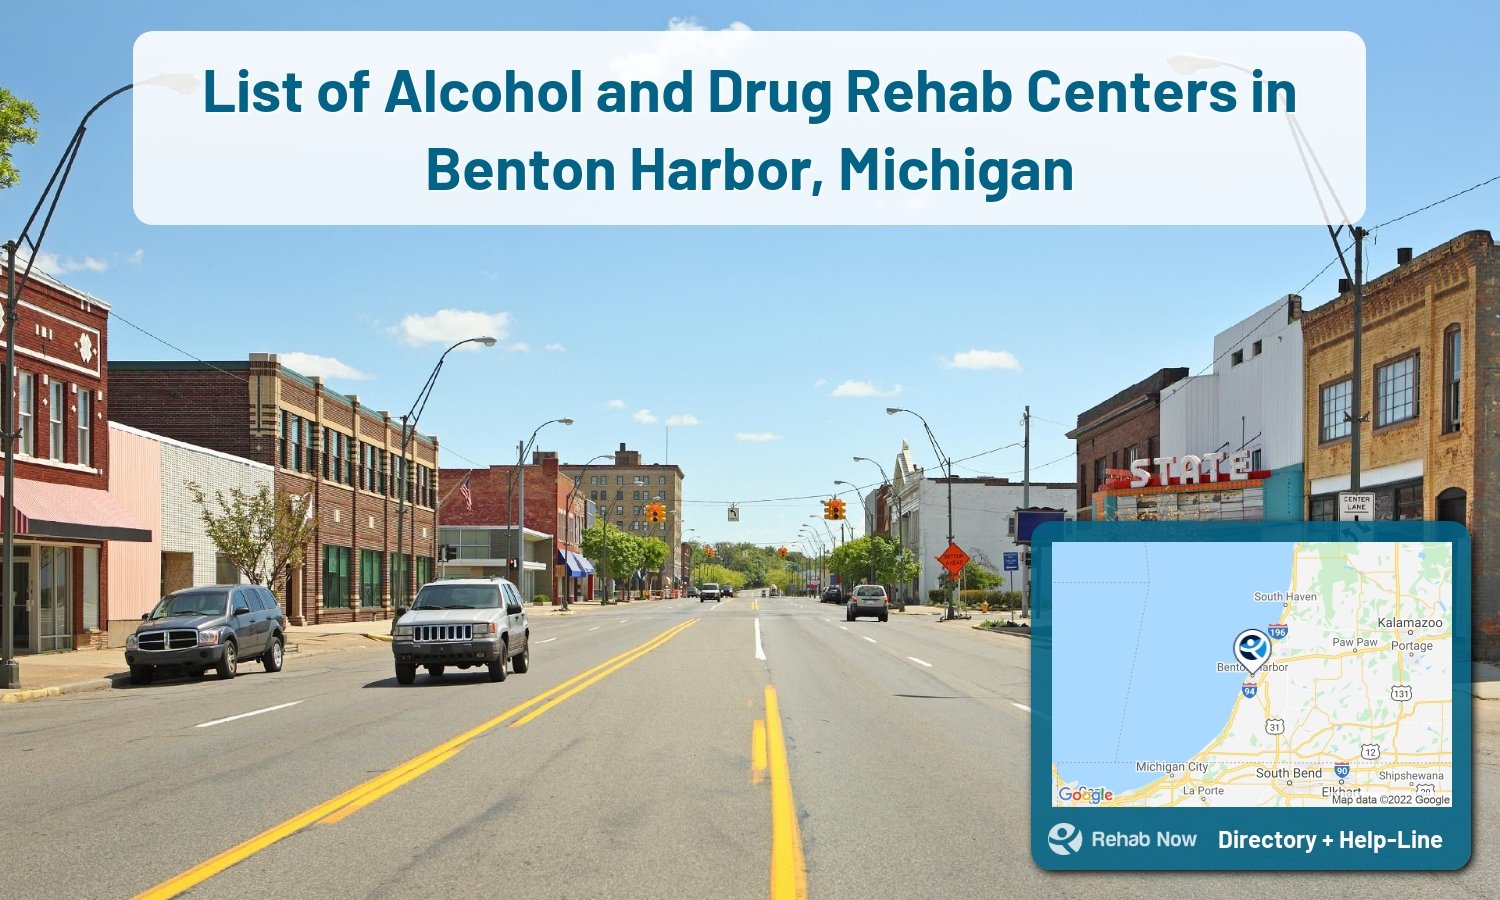 Our experts can help you find treatment now in Benton Harbor, Michigan. We list drug rehab and alcohol centers in Michigan.